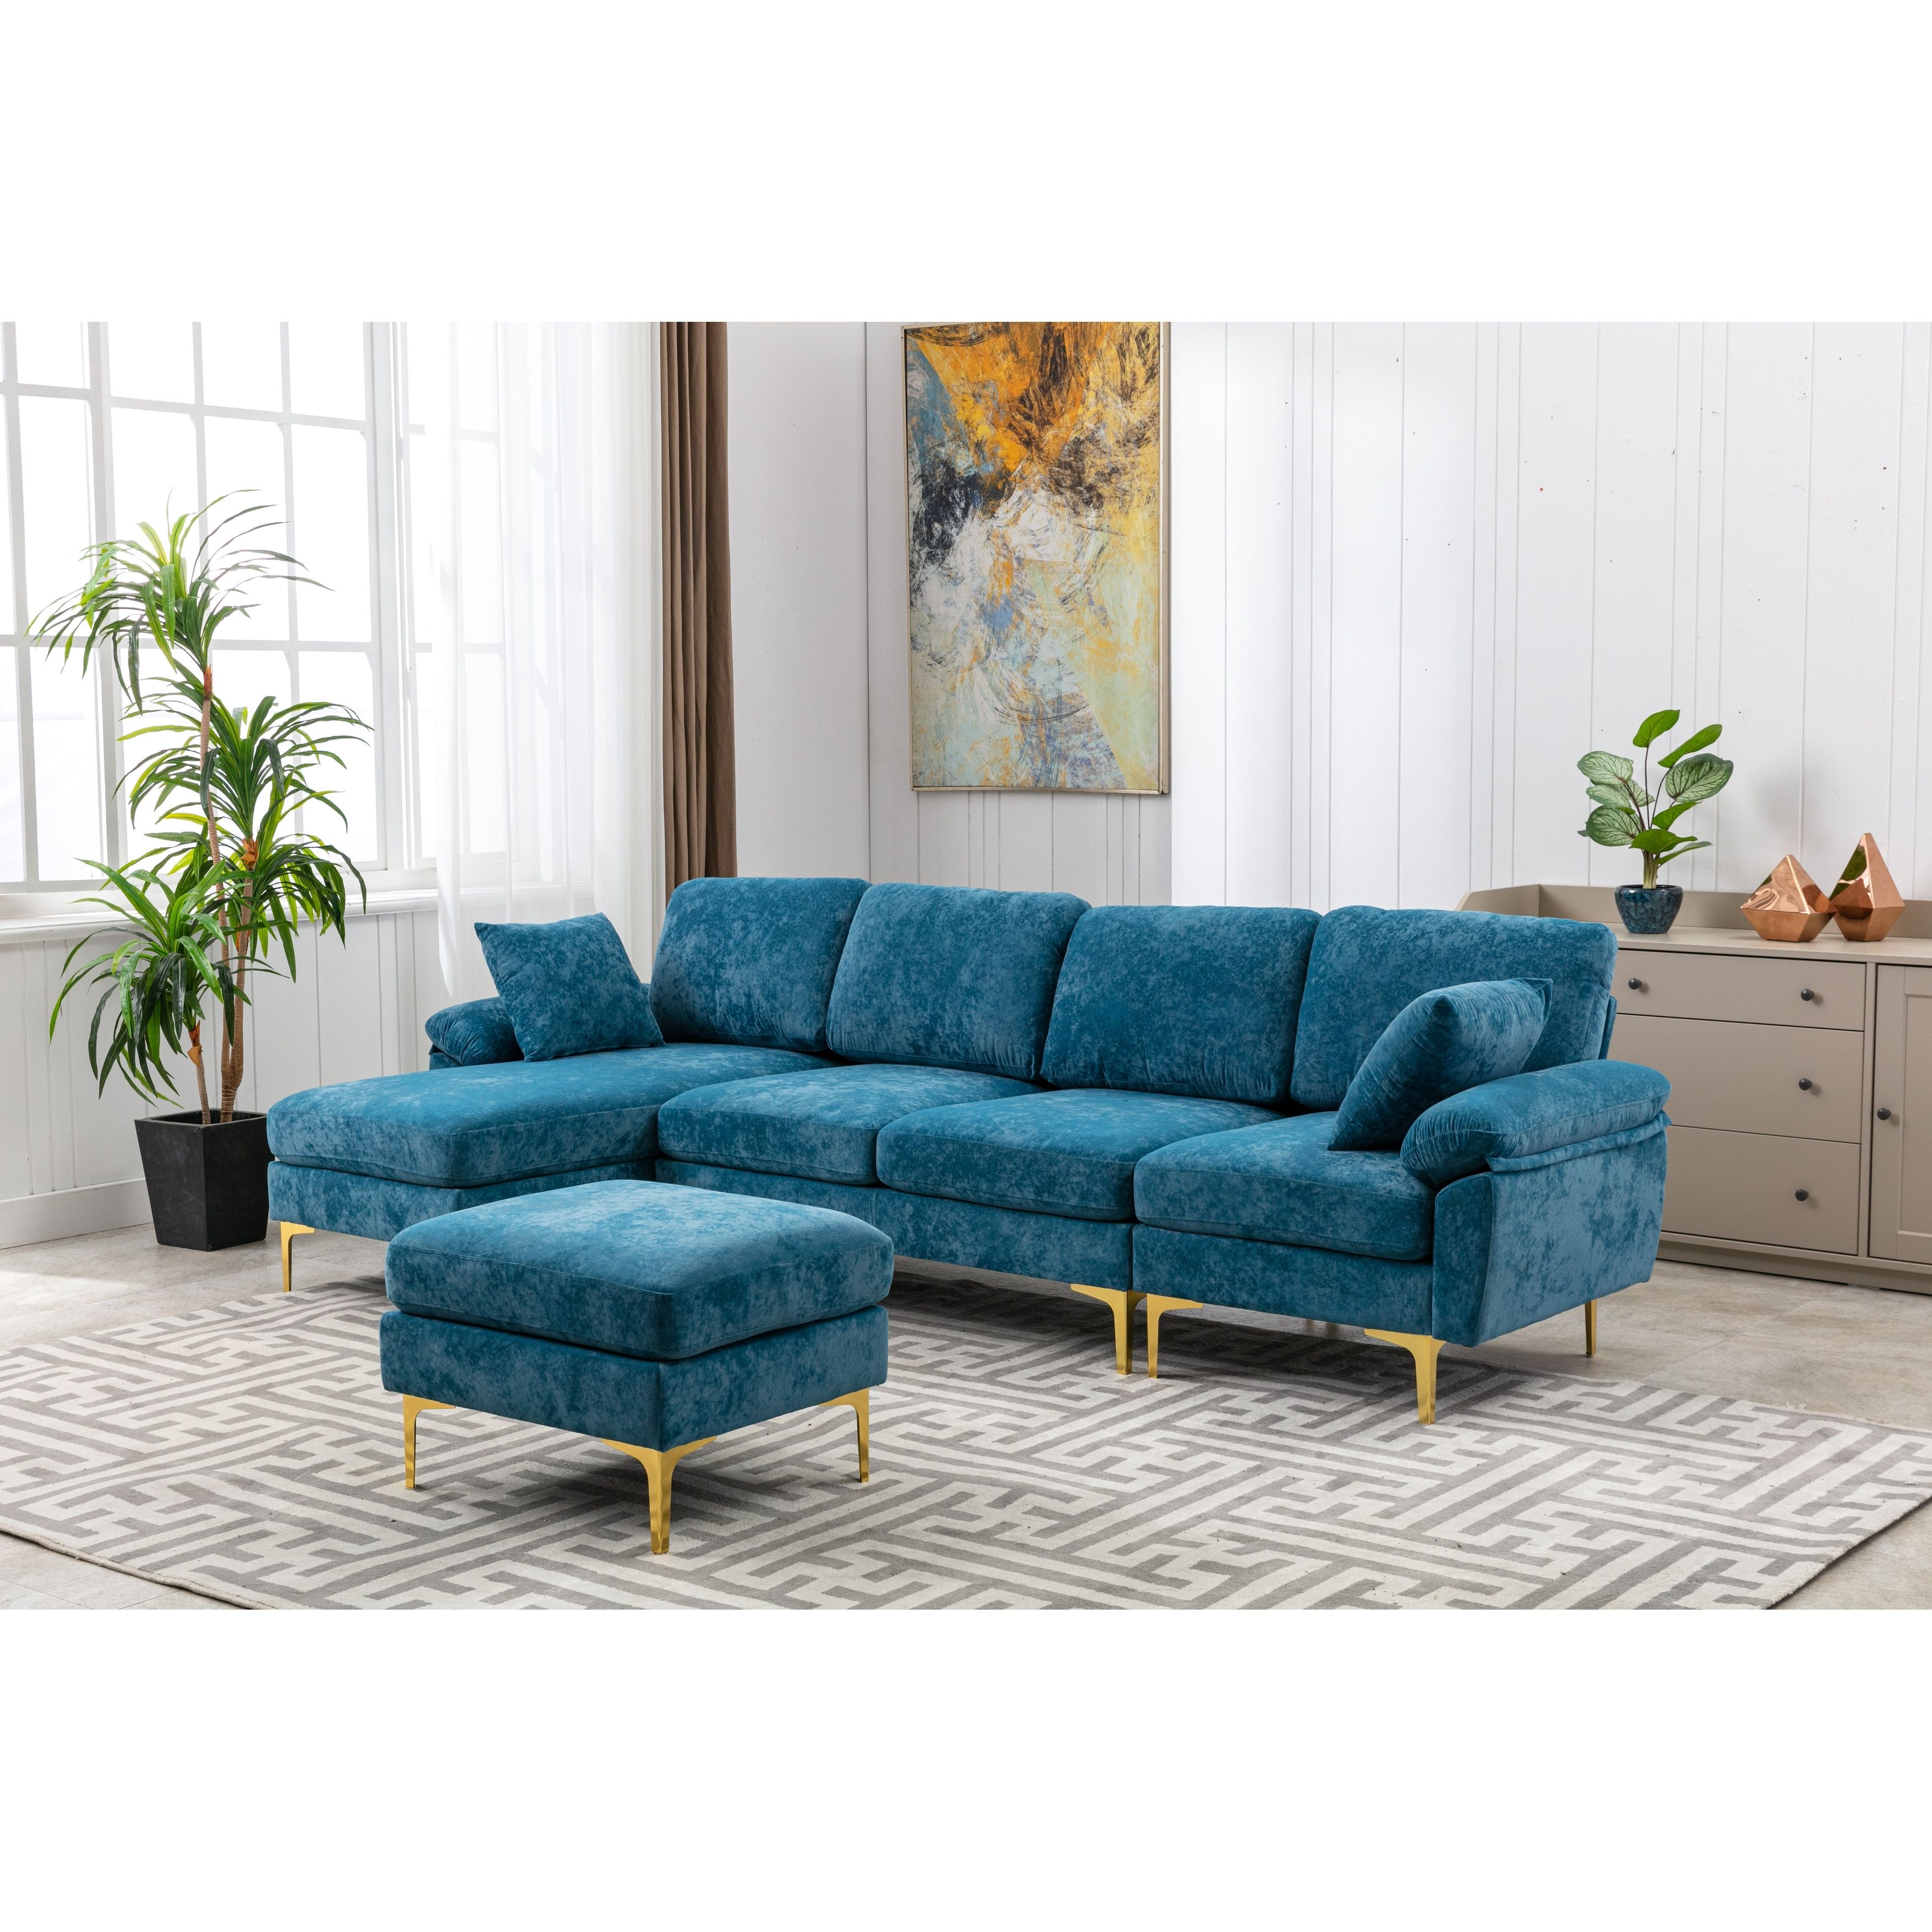 Living Room Sectional Sofa, L Shaped Upholstered Couch With Movable Ottoman,  Convertible Modular Sofa With Gold Metal Legs – – 36690154 Throughout Sectional Sofas With Movable Ottoman (View 16 of 20)